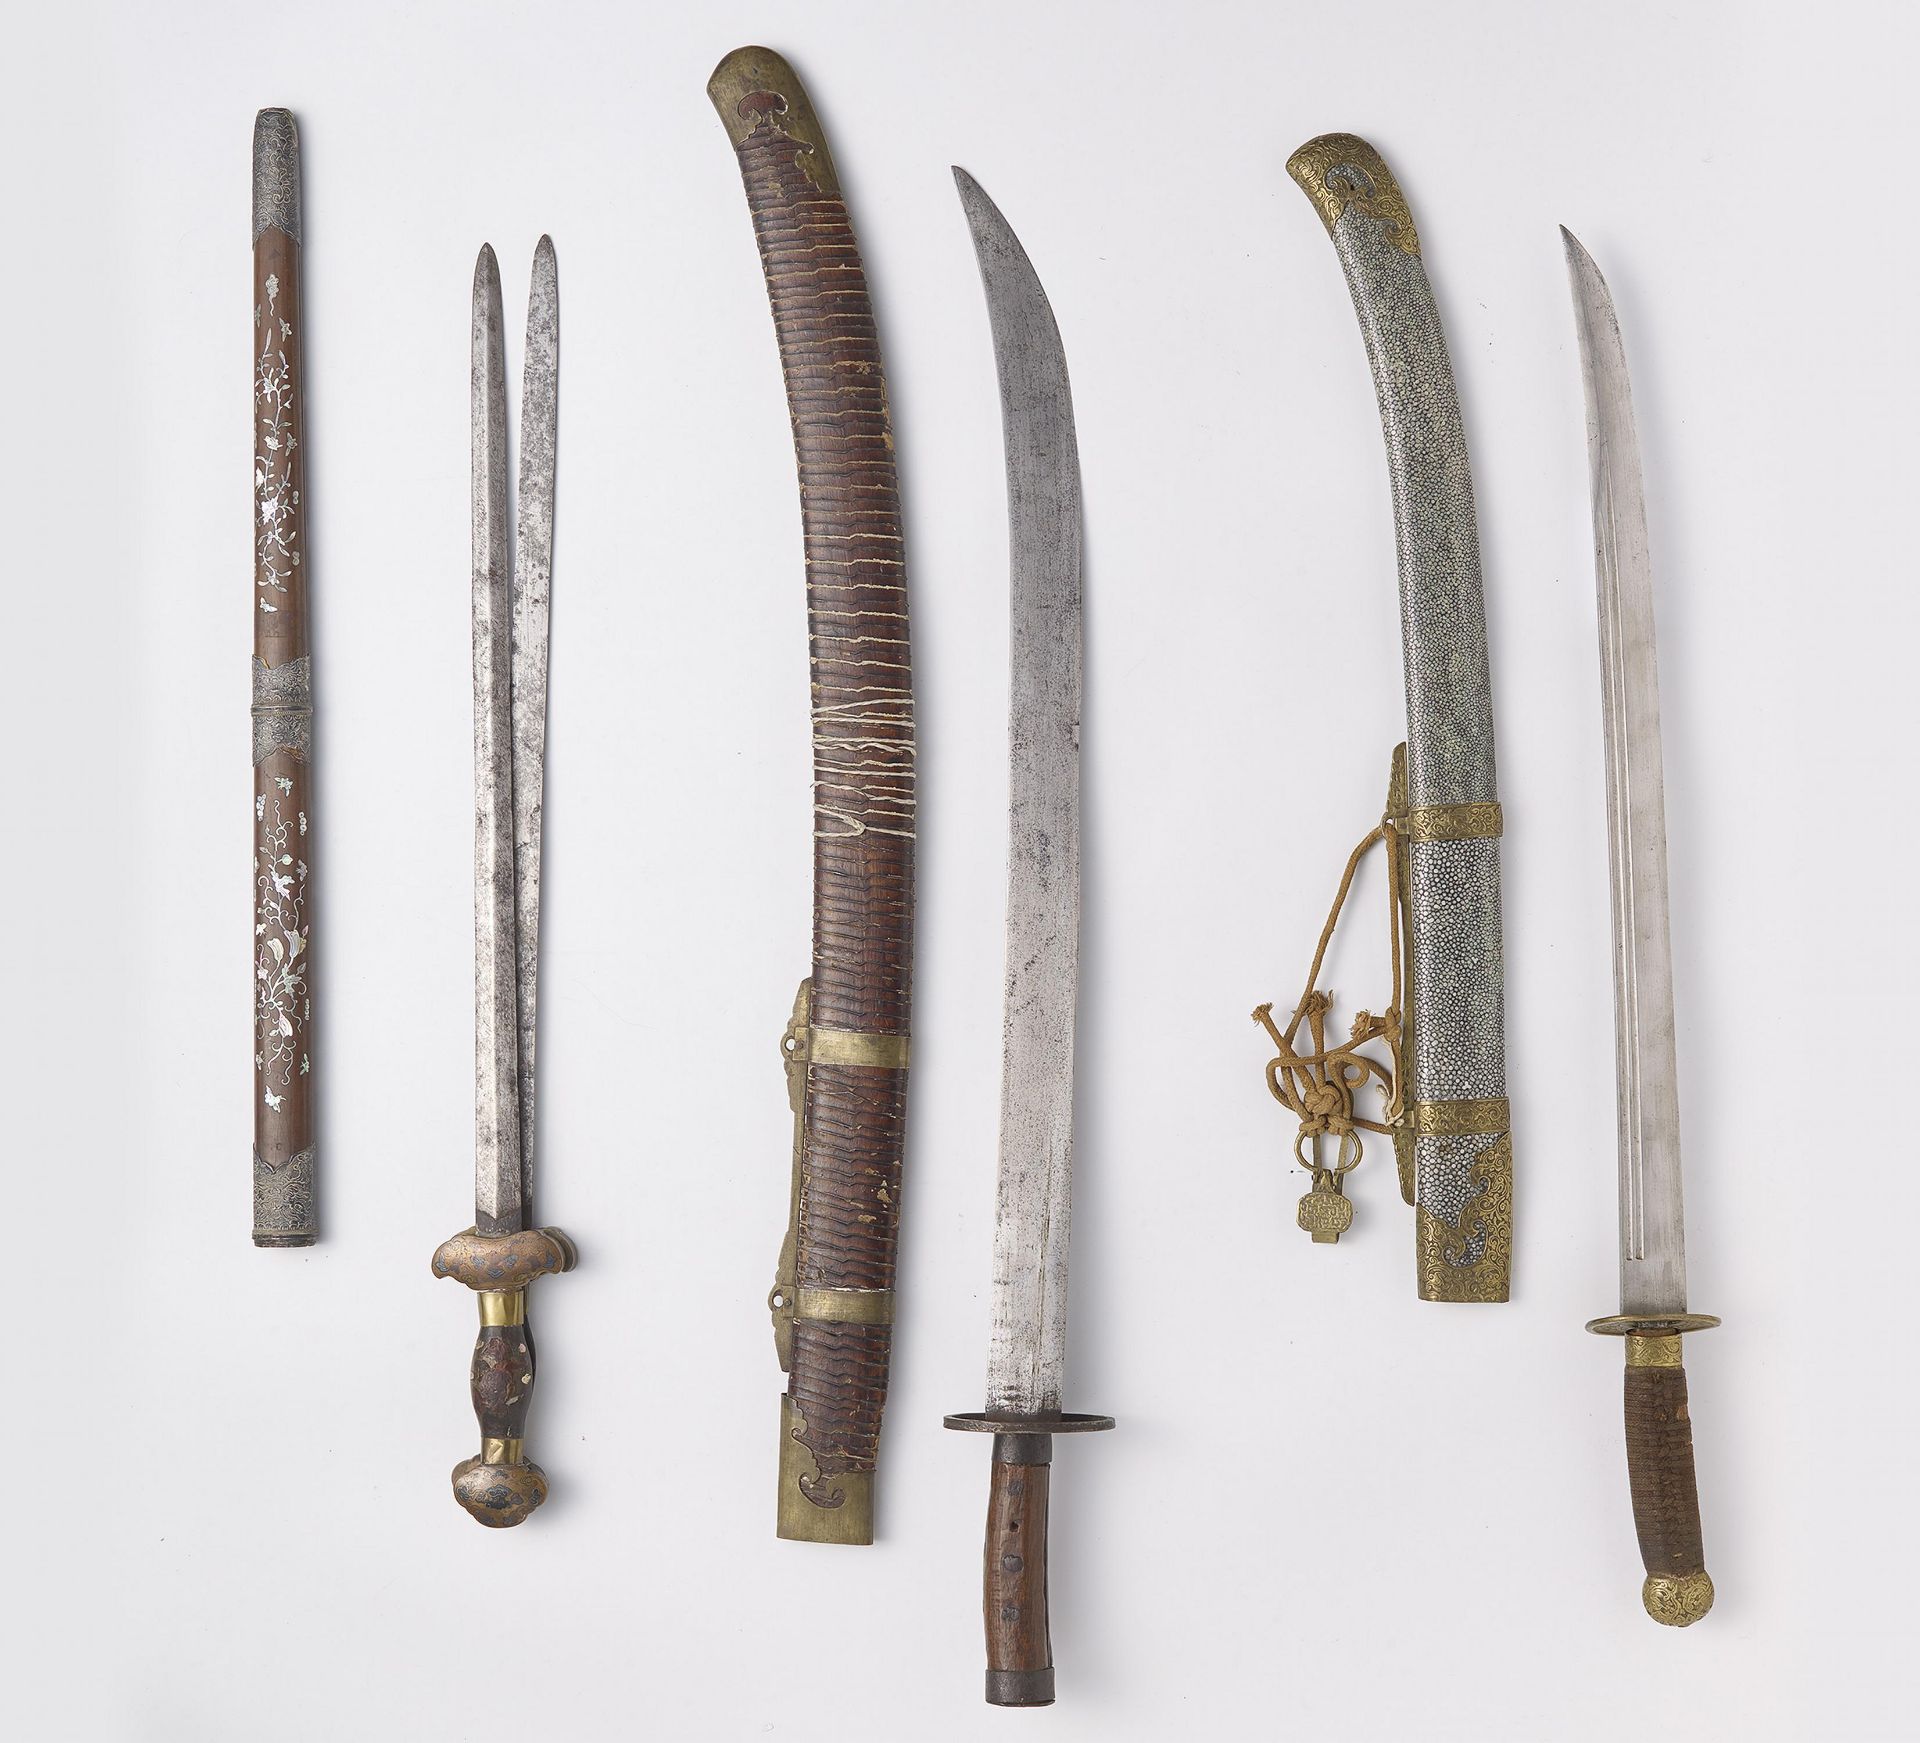 ONE STRAIGHT DOUBLE AND TWO CURVED SWORDS WITH SHEATHS. Origin: China. Dynasty: Qing dynasty. - Bild 2 aus 2